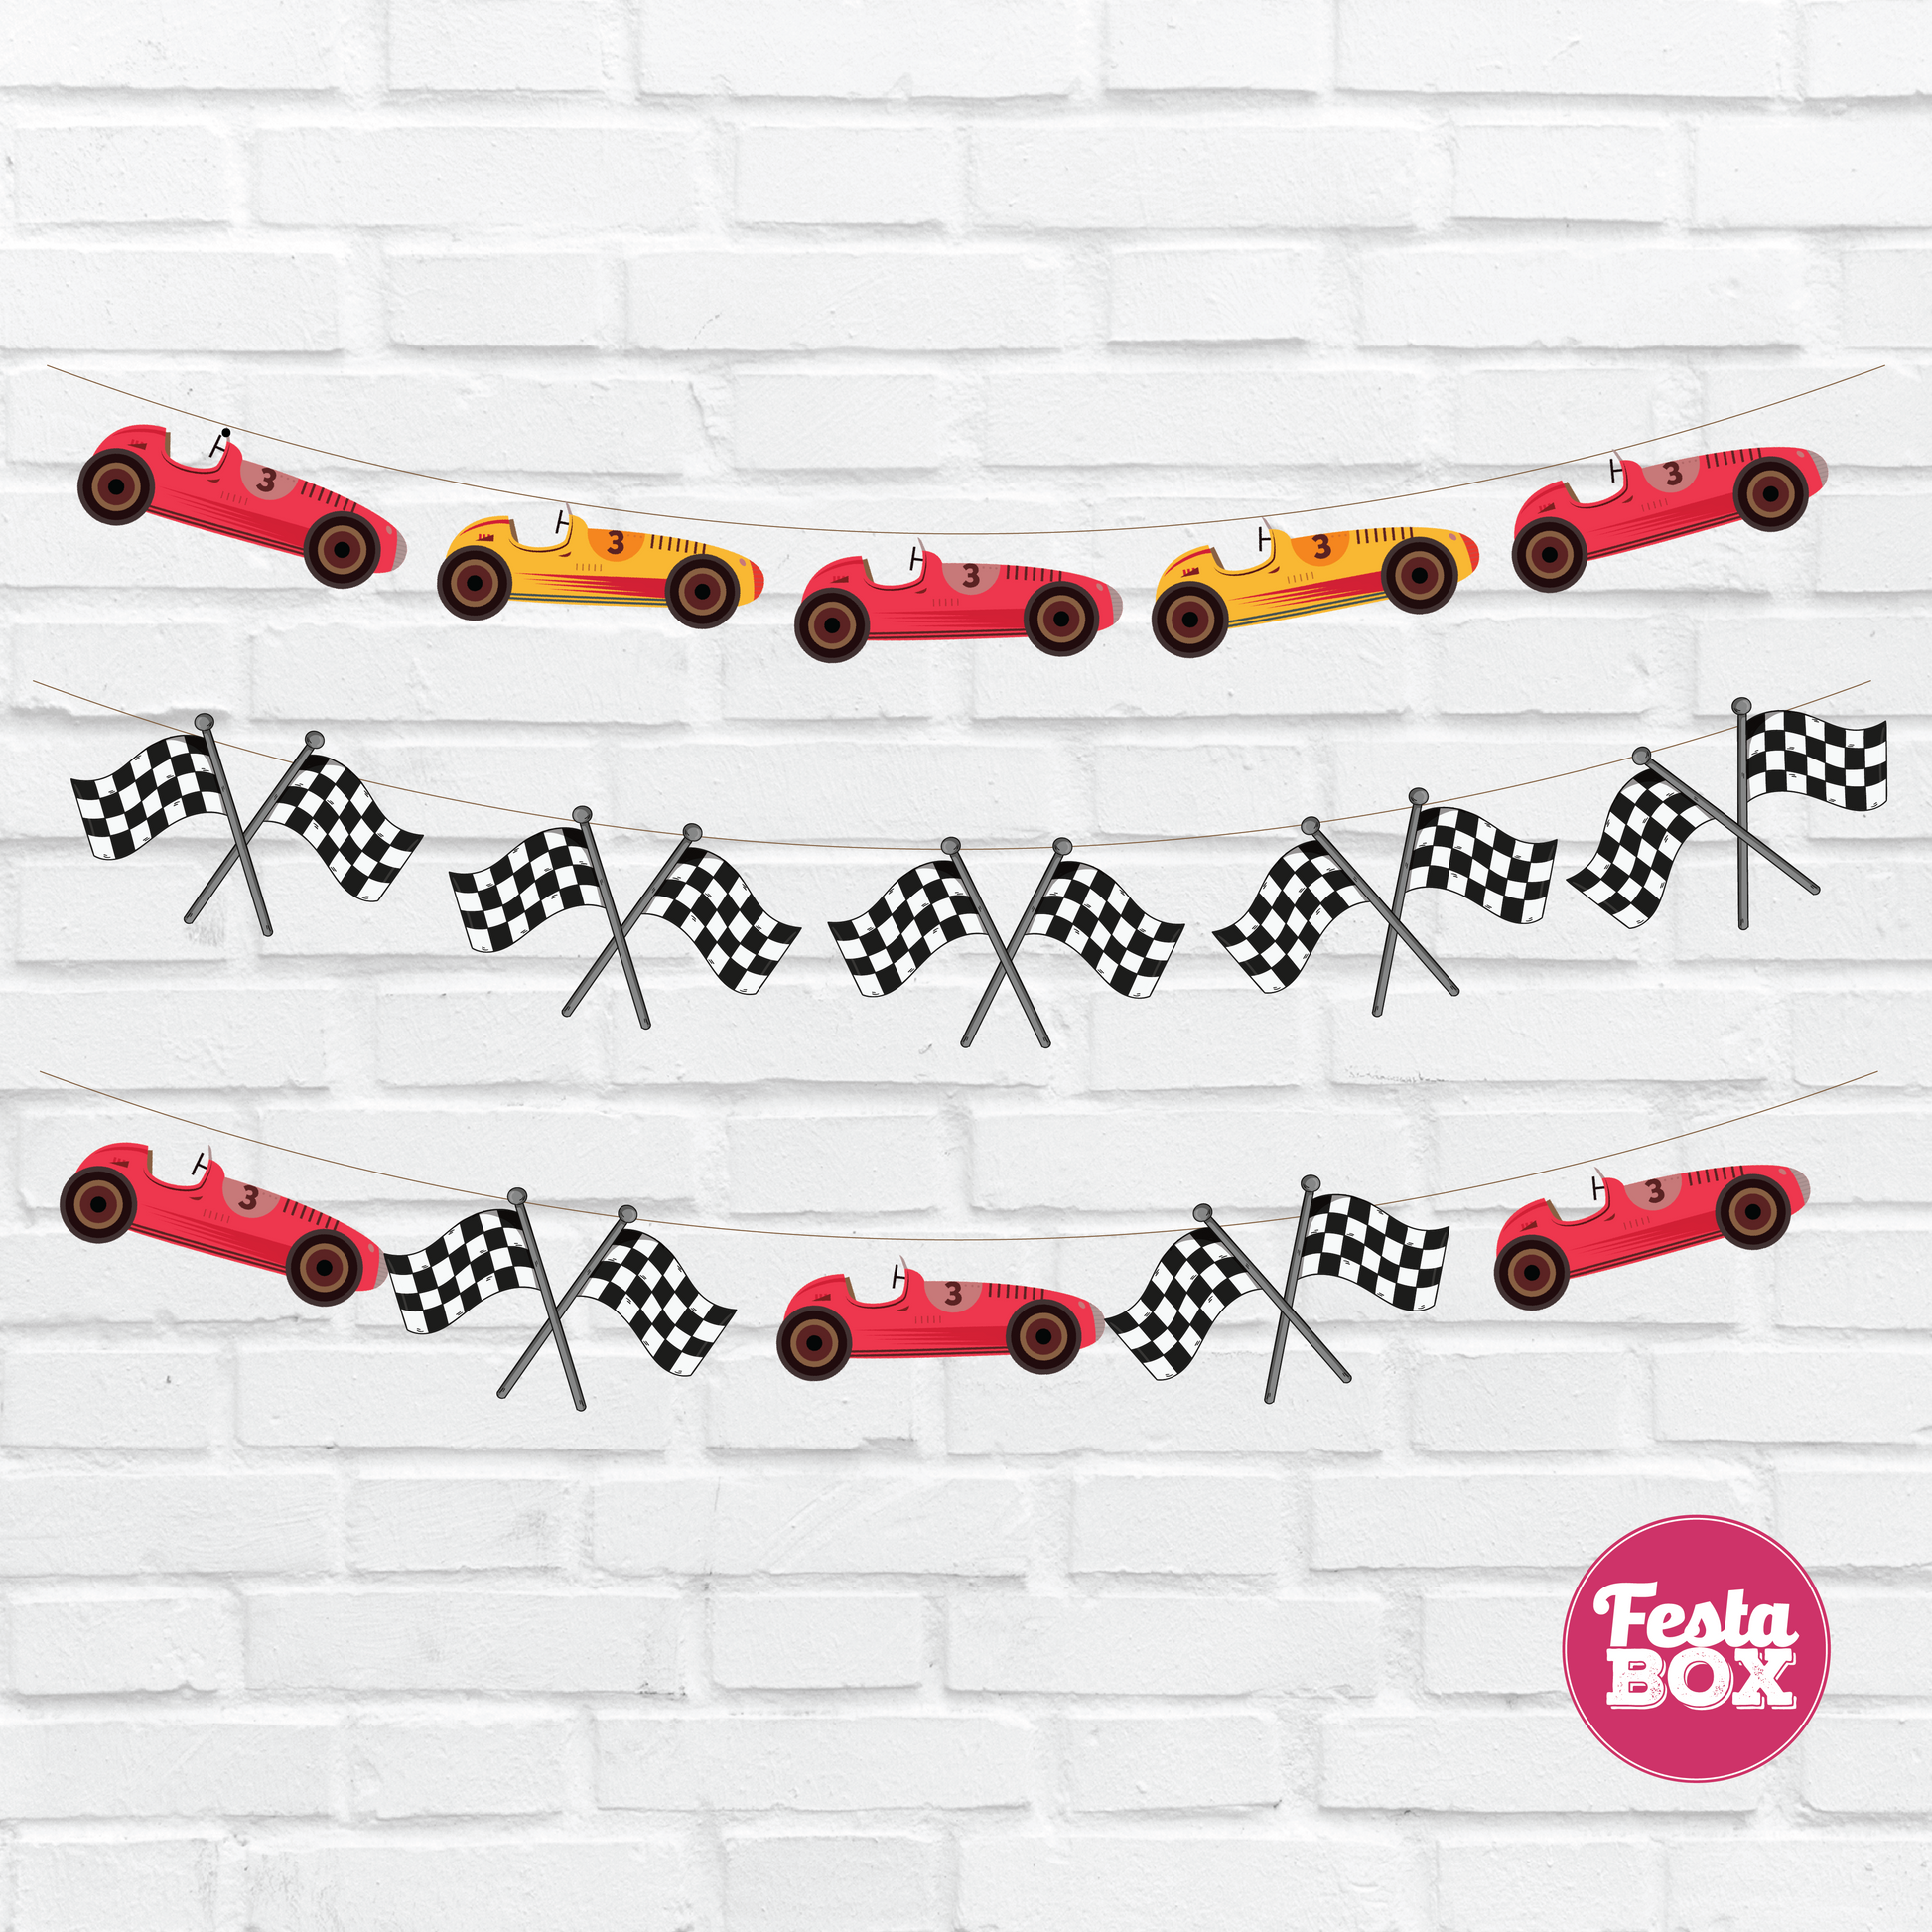 Background Banner for Birthday Party Decoration – Race Car Theme